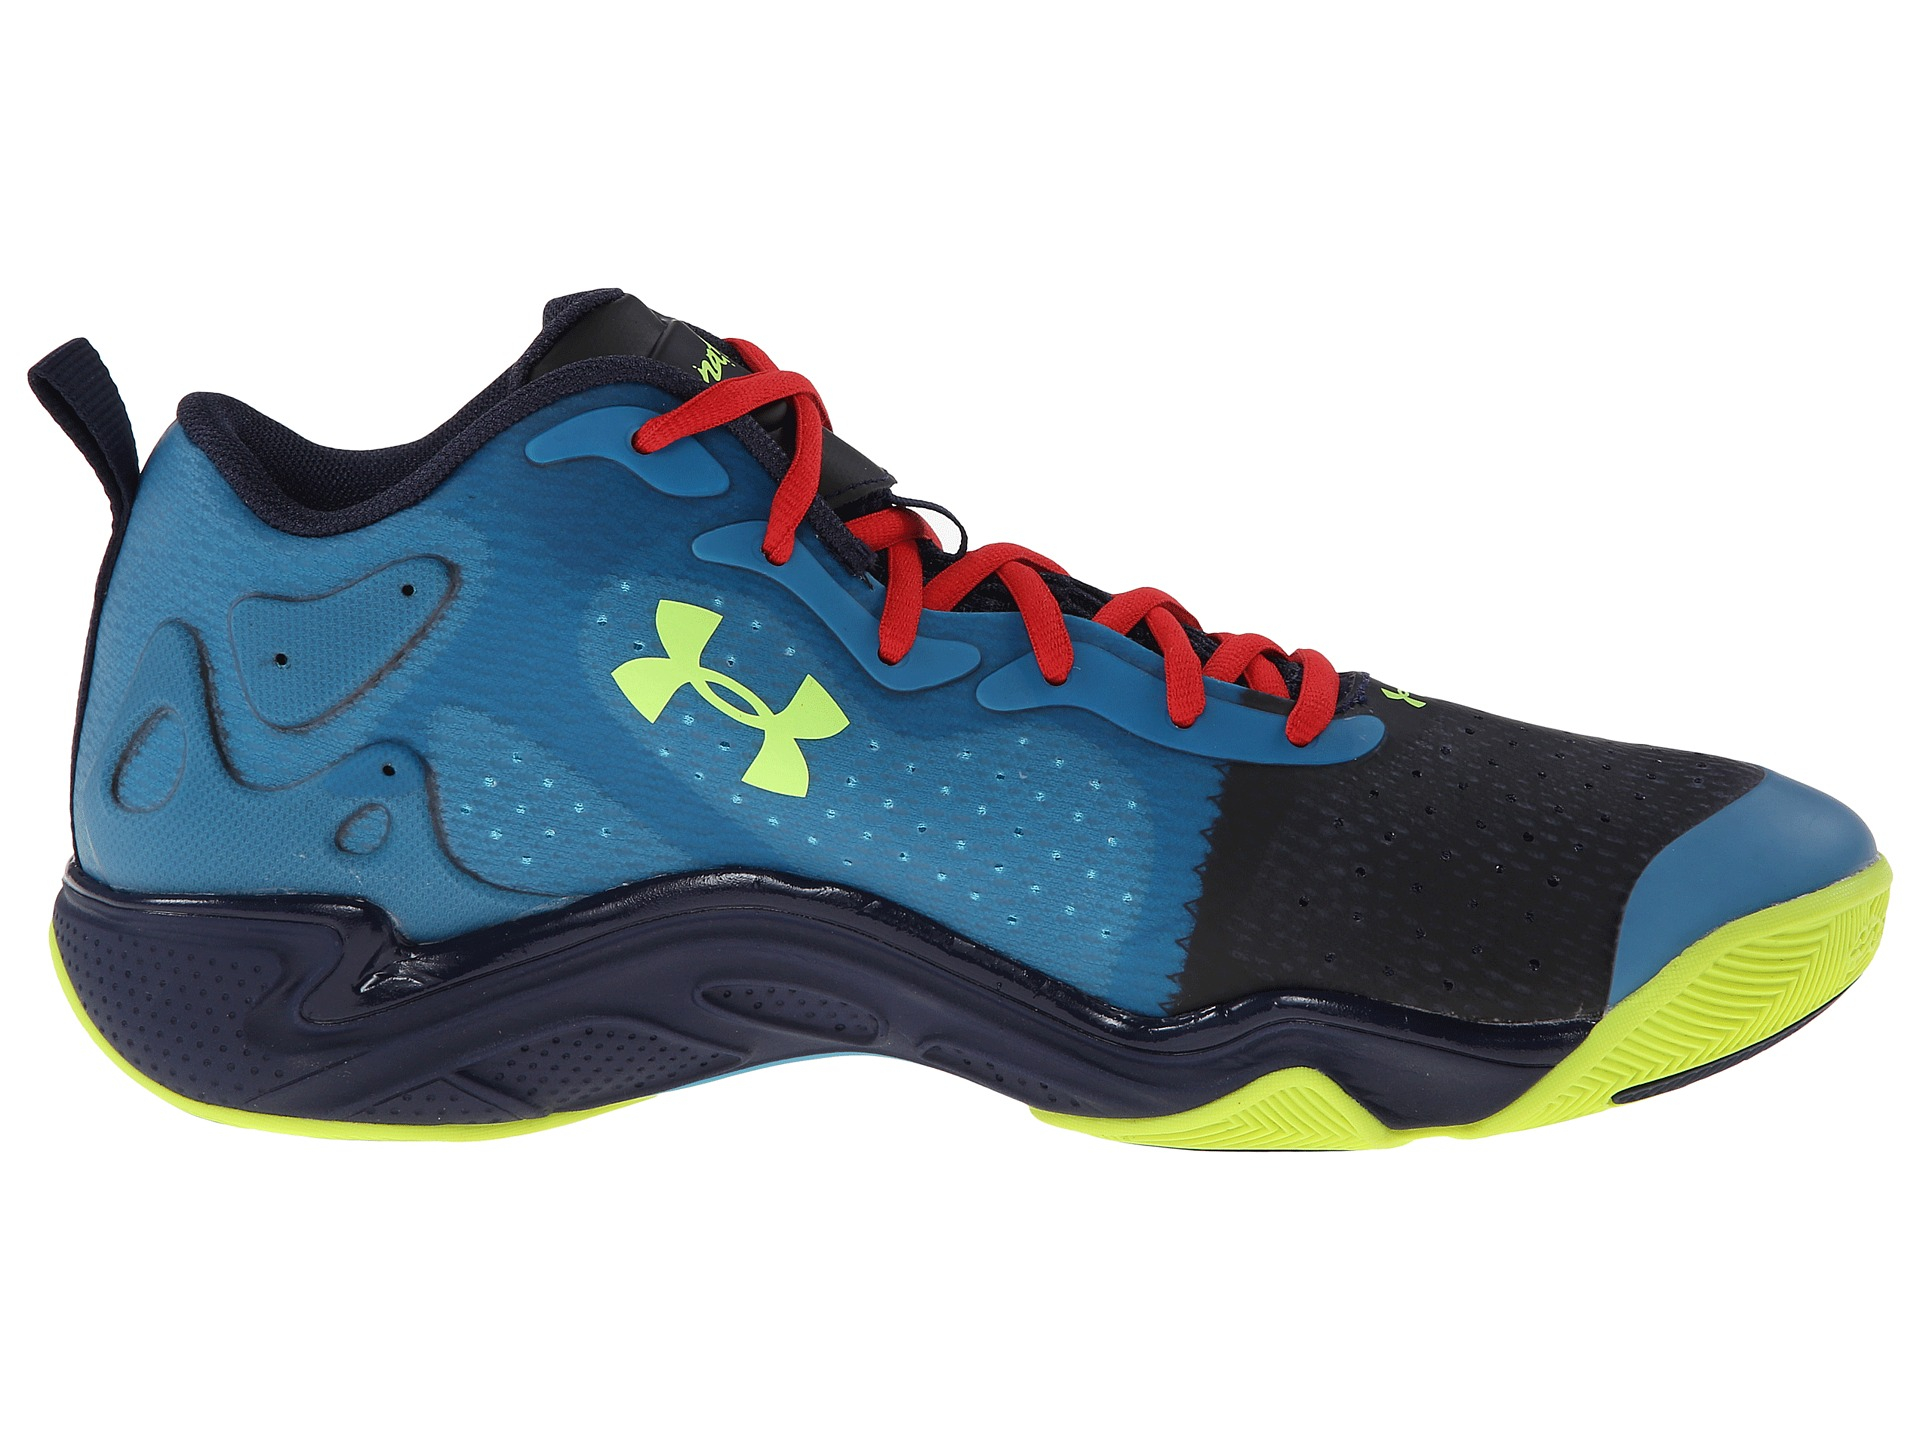 Under Armour Rubber Ua Micro G™ Anatomix Spawn 2 Low in ...